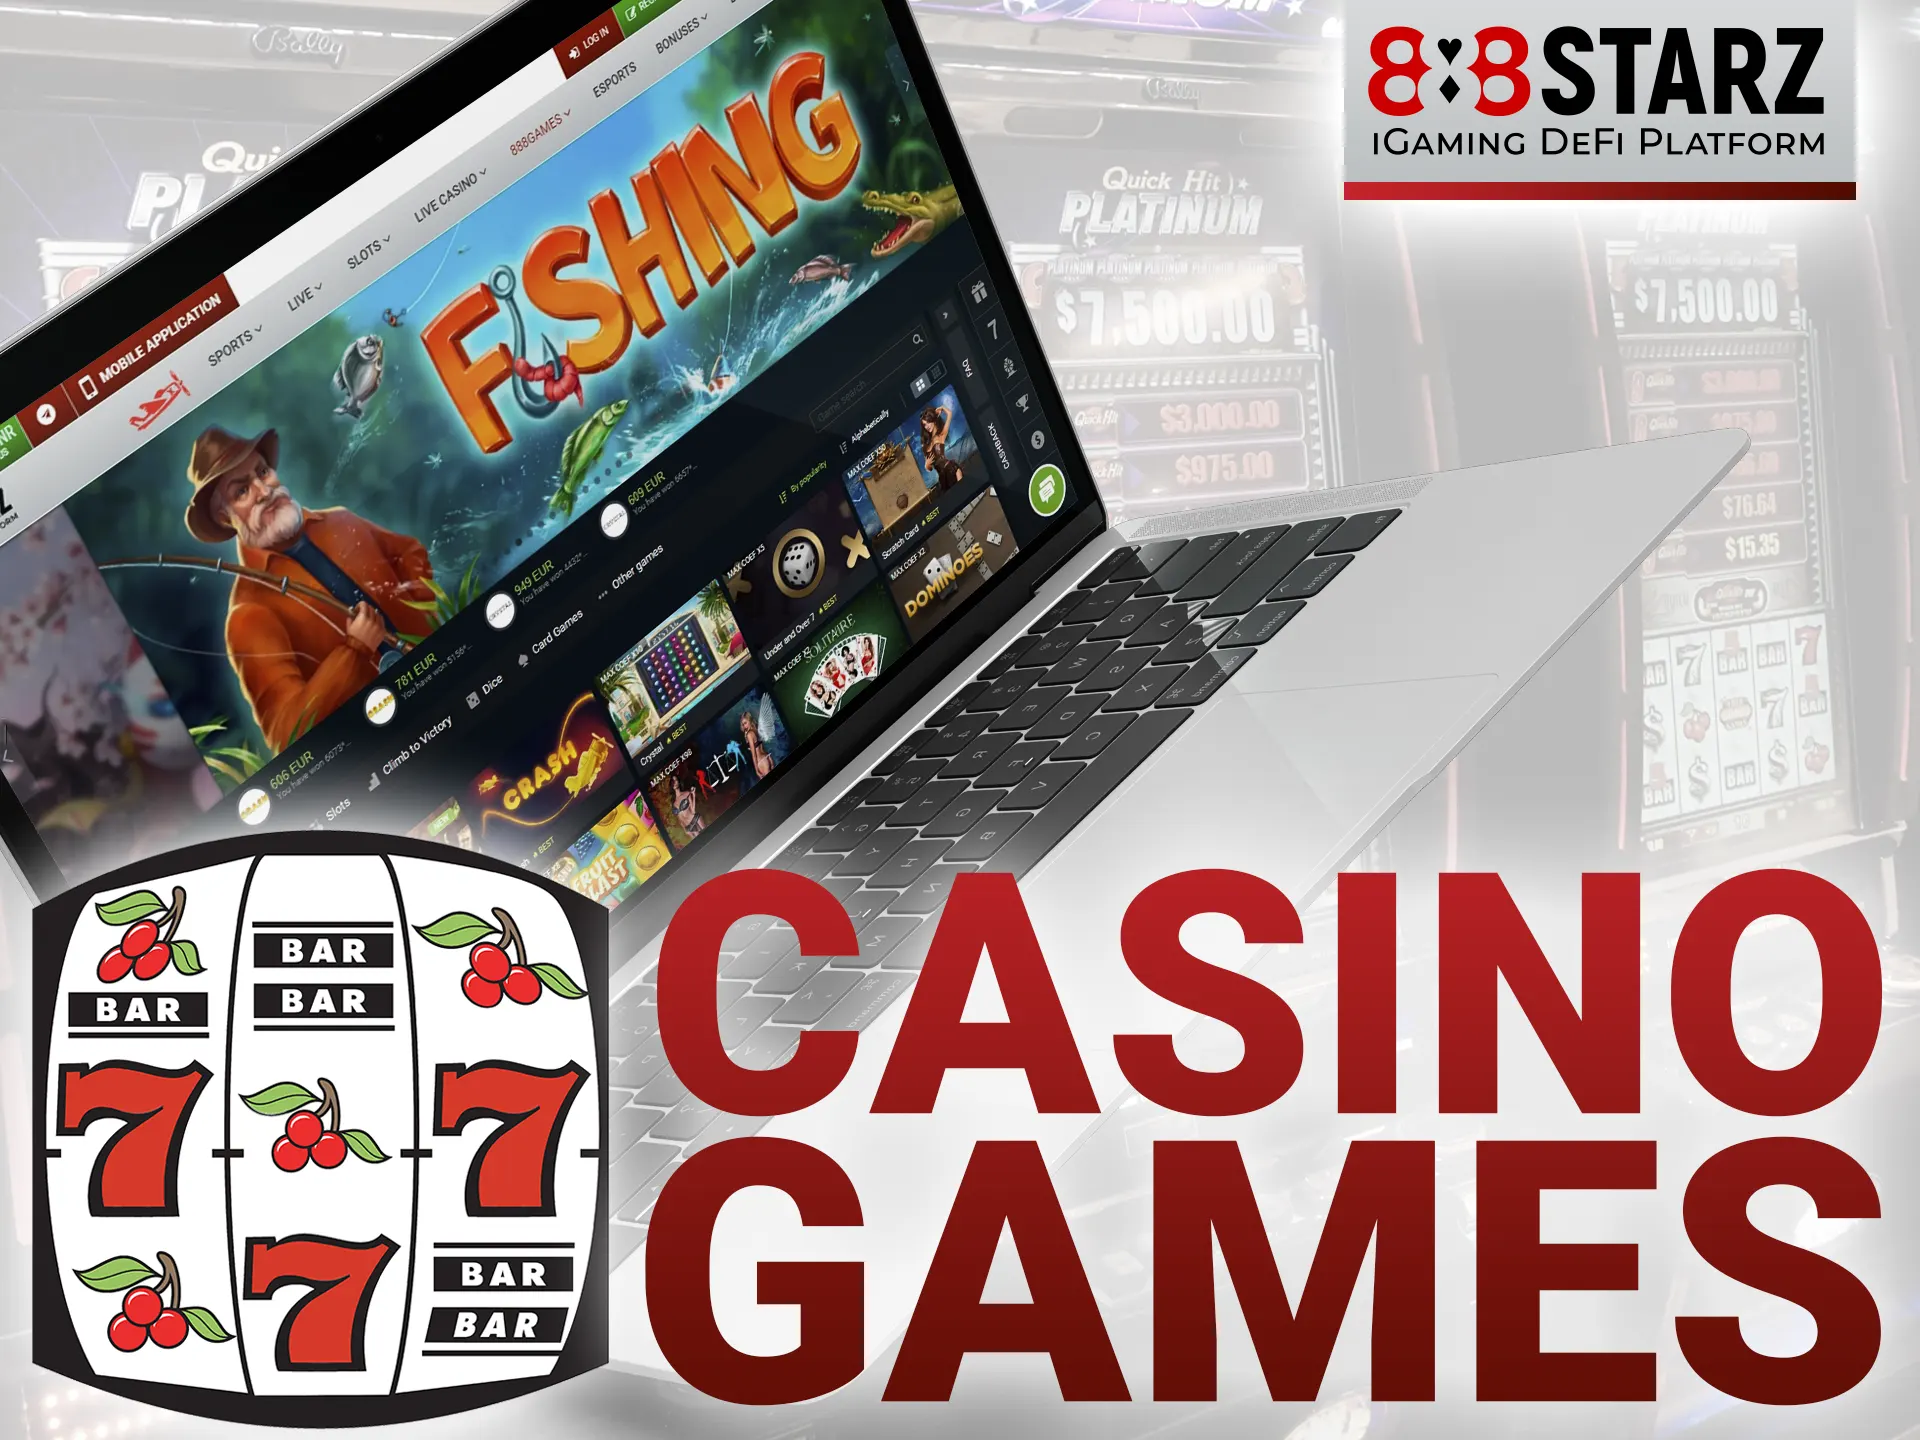 An extensive collection of classic slots, table games and live dealer games awaits players of all levels at 888starz Casino.